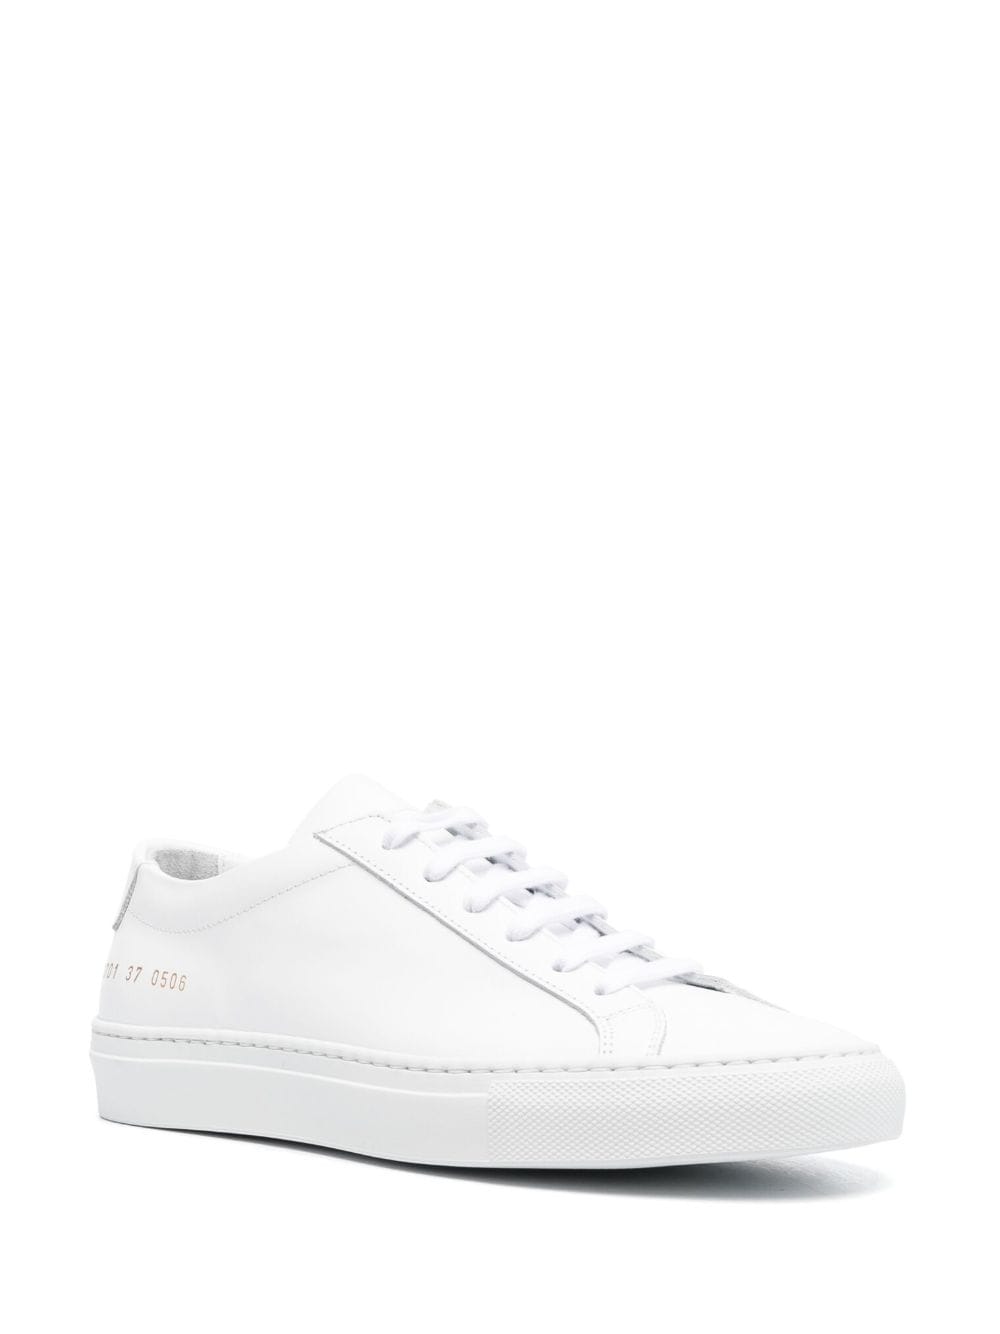 COMMON PROJECTS COMMON PROJECTS- Original Achilles Low Leather Sneakers